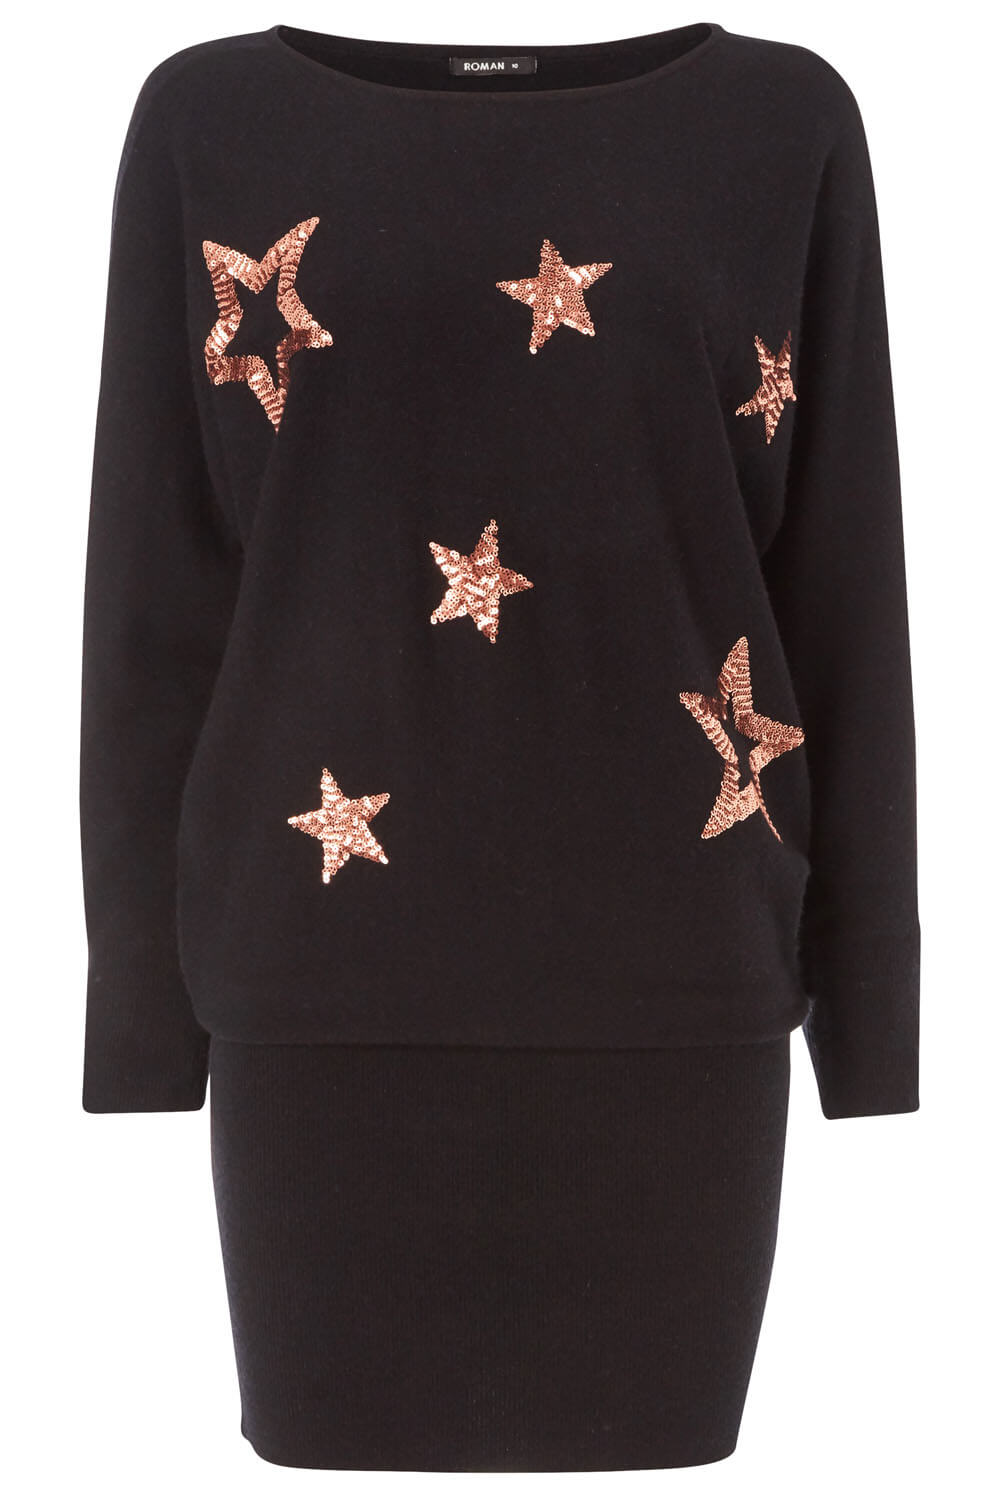 Black Sequin Star Knitted Dress, Image 5 of 5